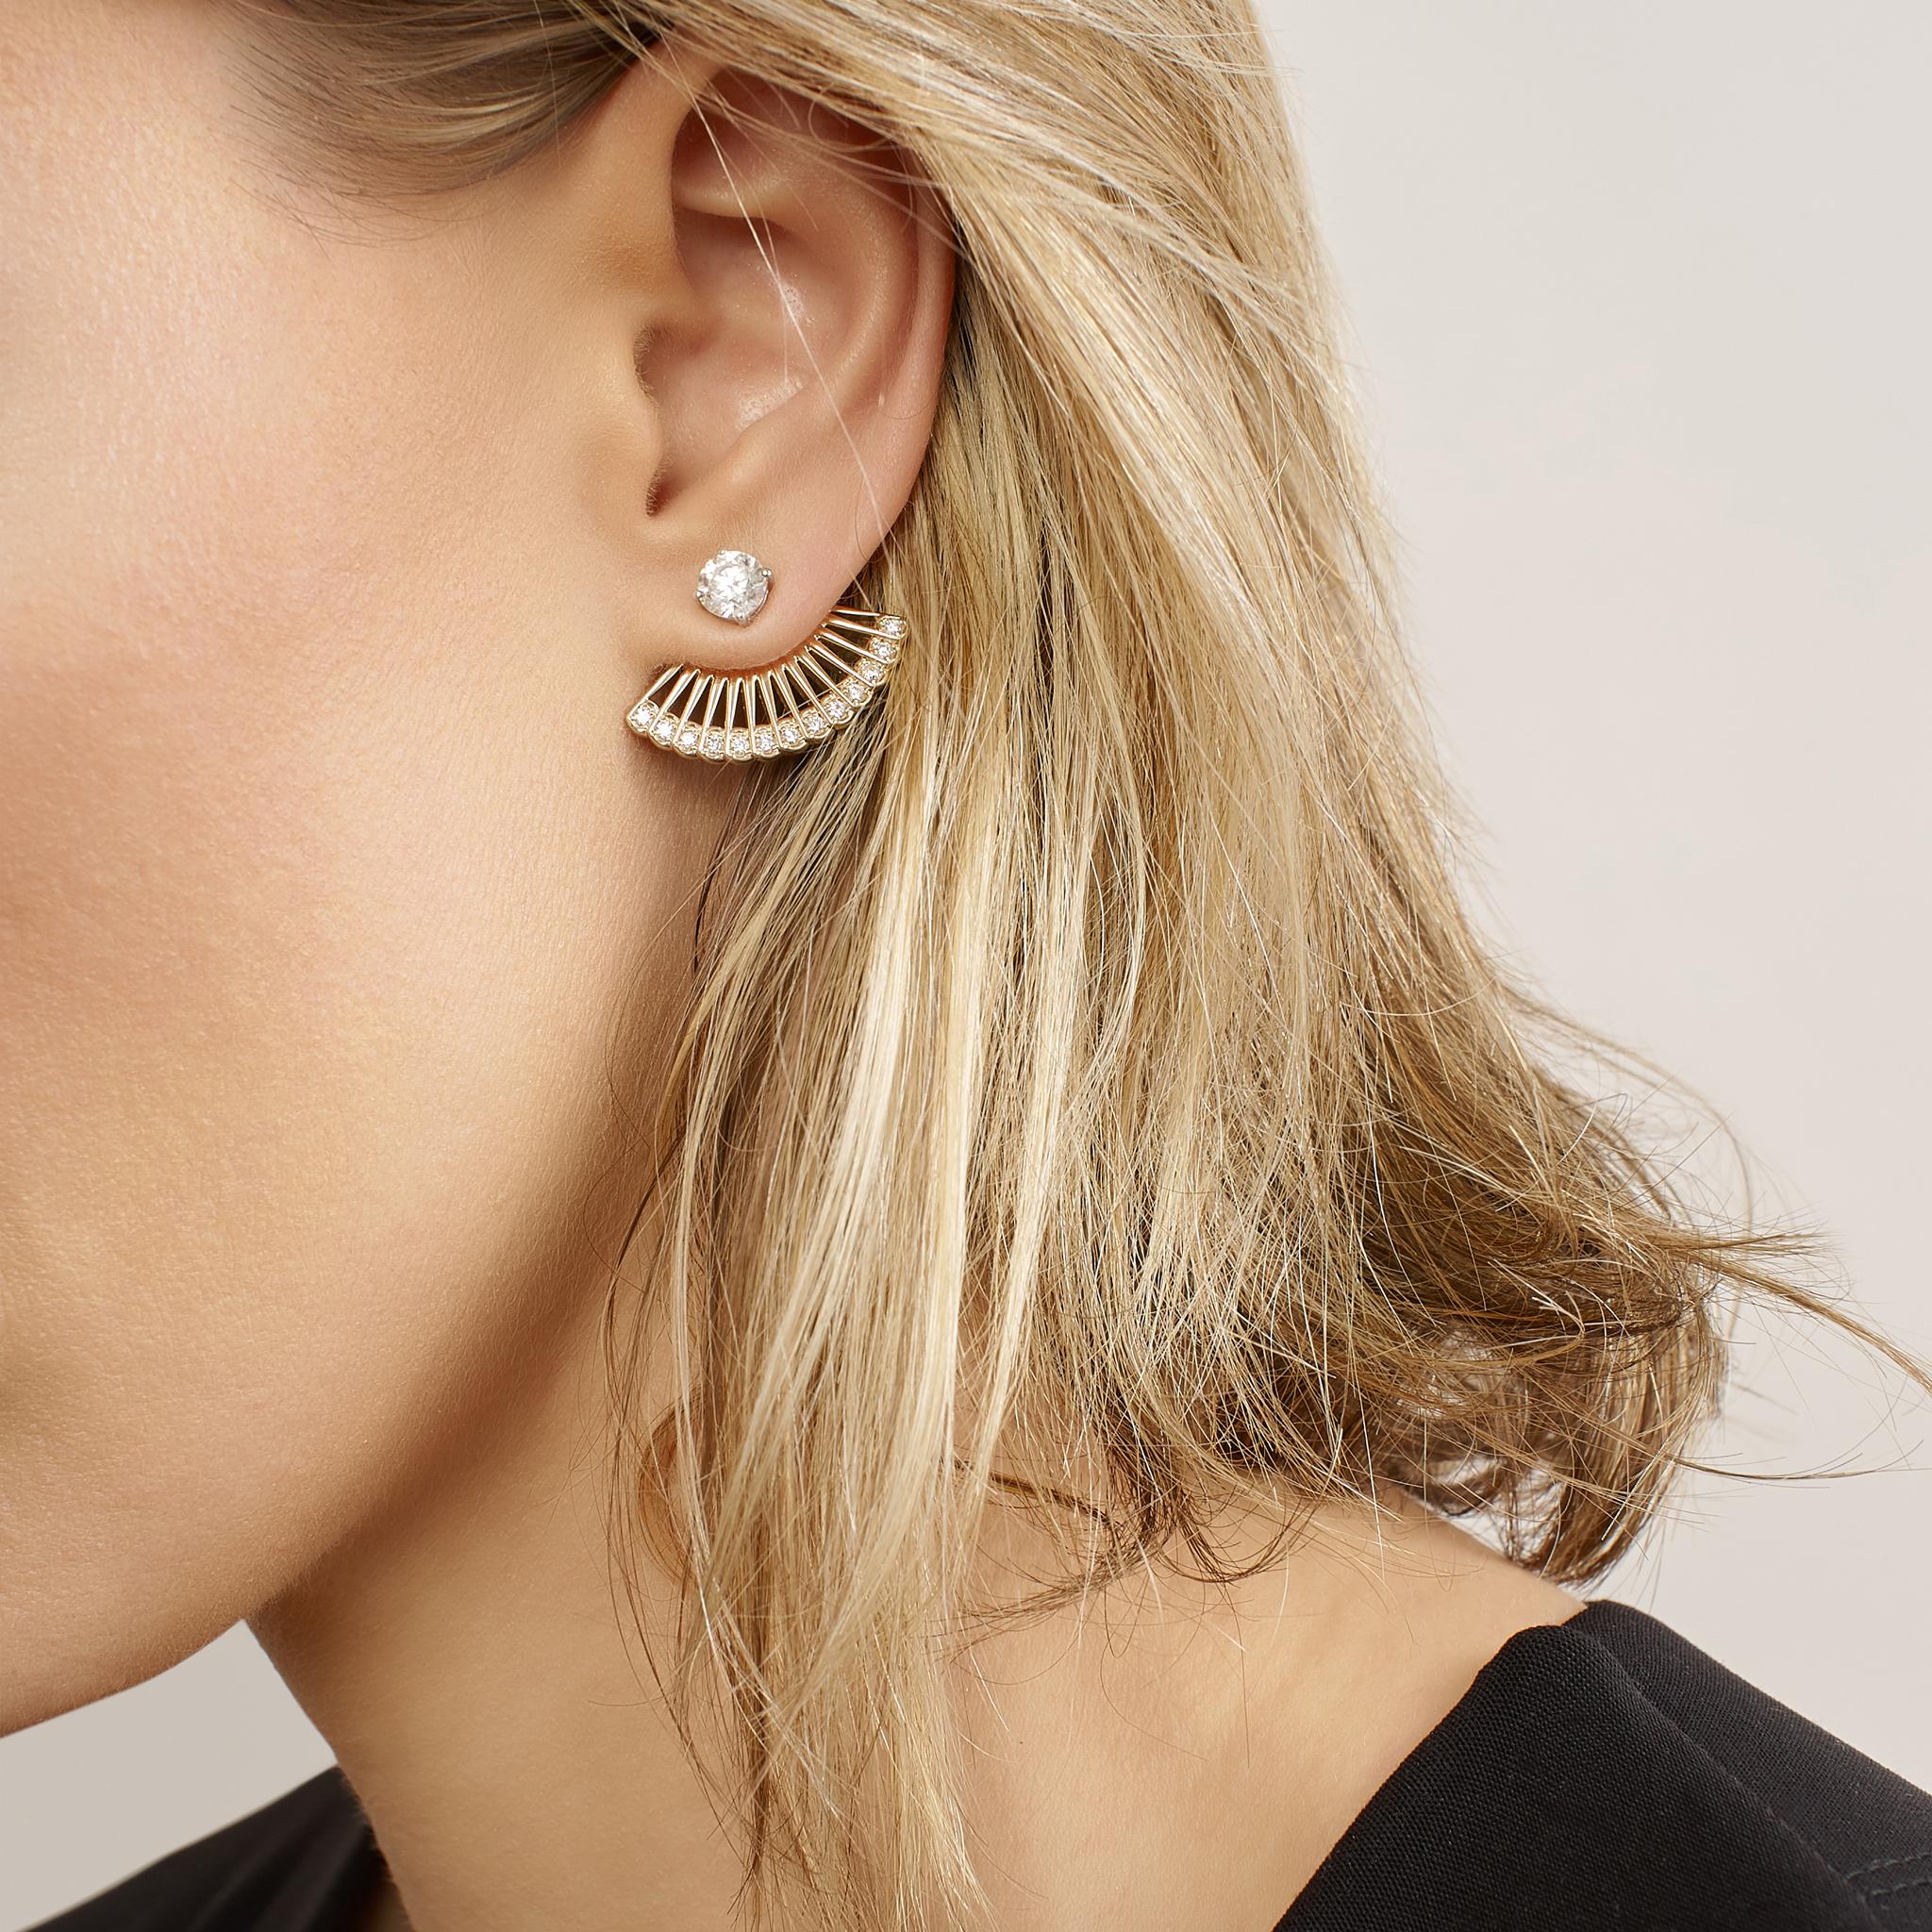 SELIN KENT's Zoe Fan Ear Jacket is a contemporary update on a vintage fan motif that evokes another era. A beautiful way to dress up your existing studs, the 14k yellow gold ear jacket goes through the post of your earring and perfectly follows the